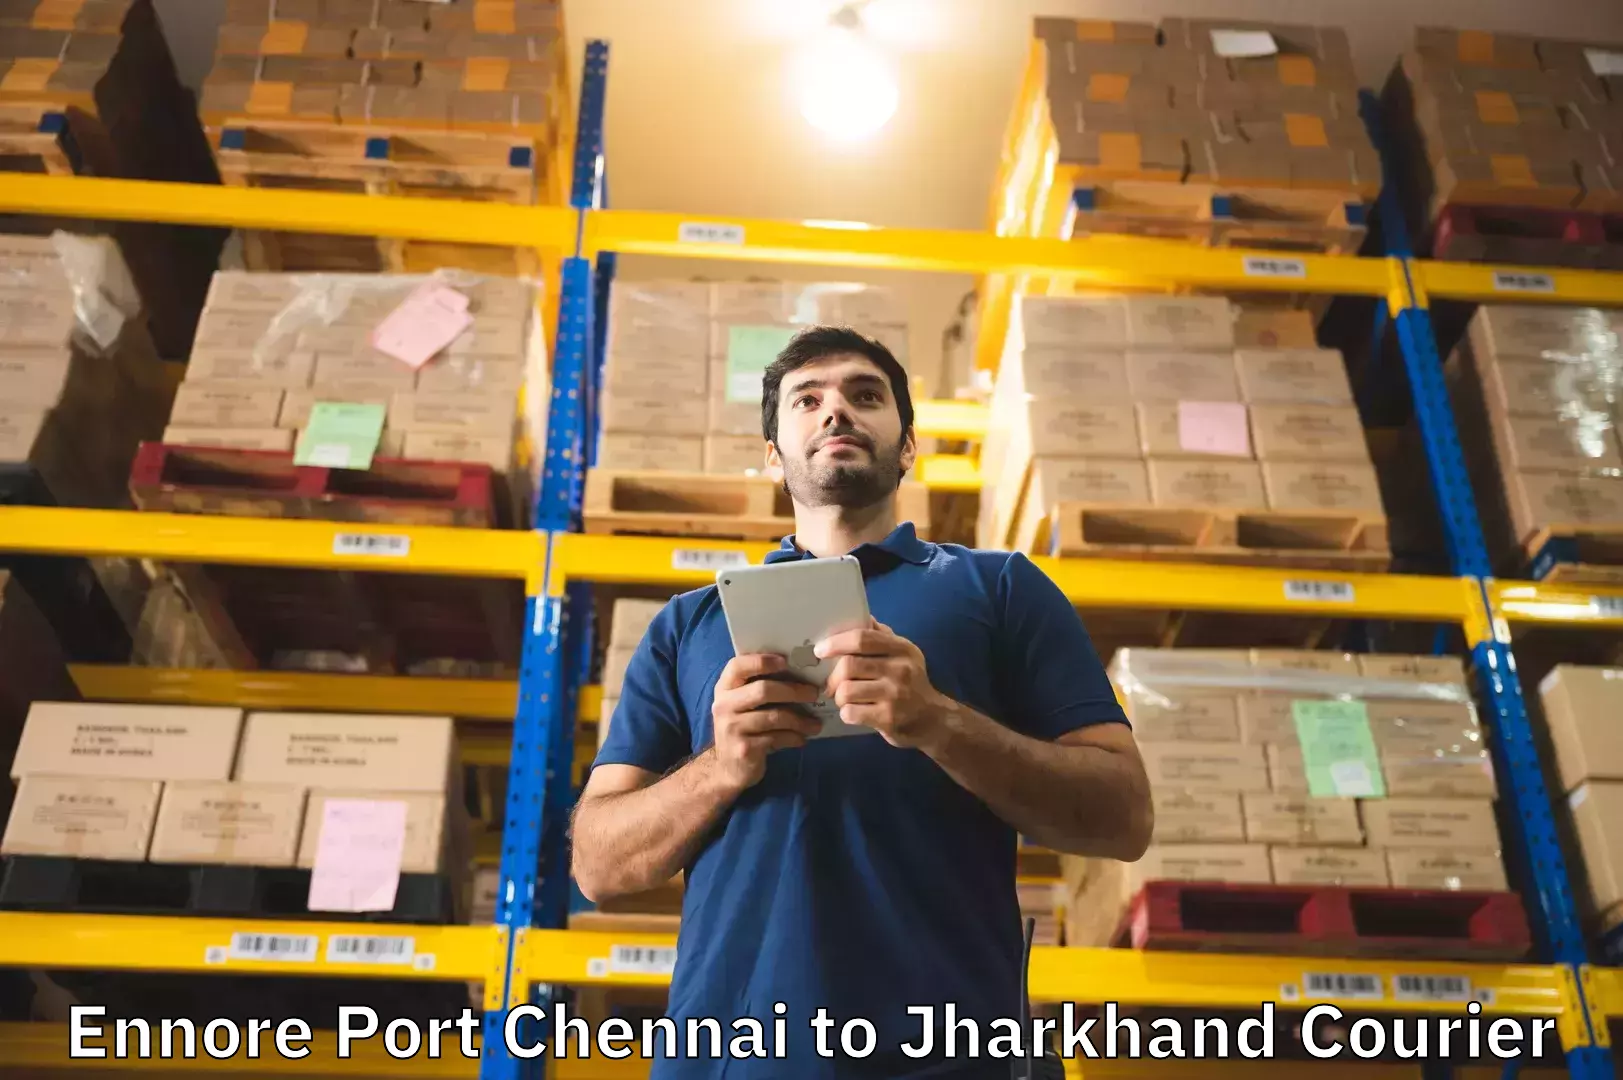 Personal effects shipping in Ennore Port Chennai to Rajdhanwar